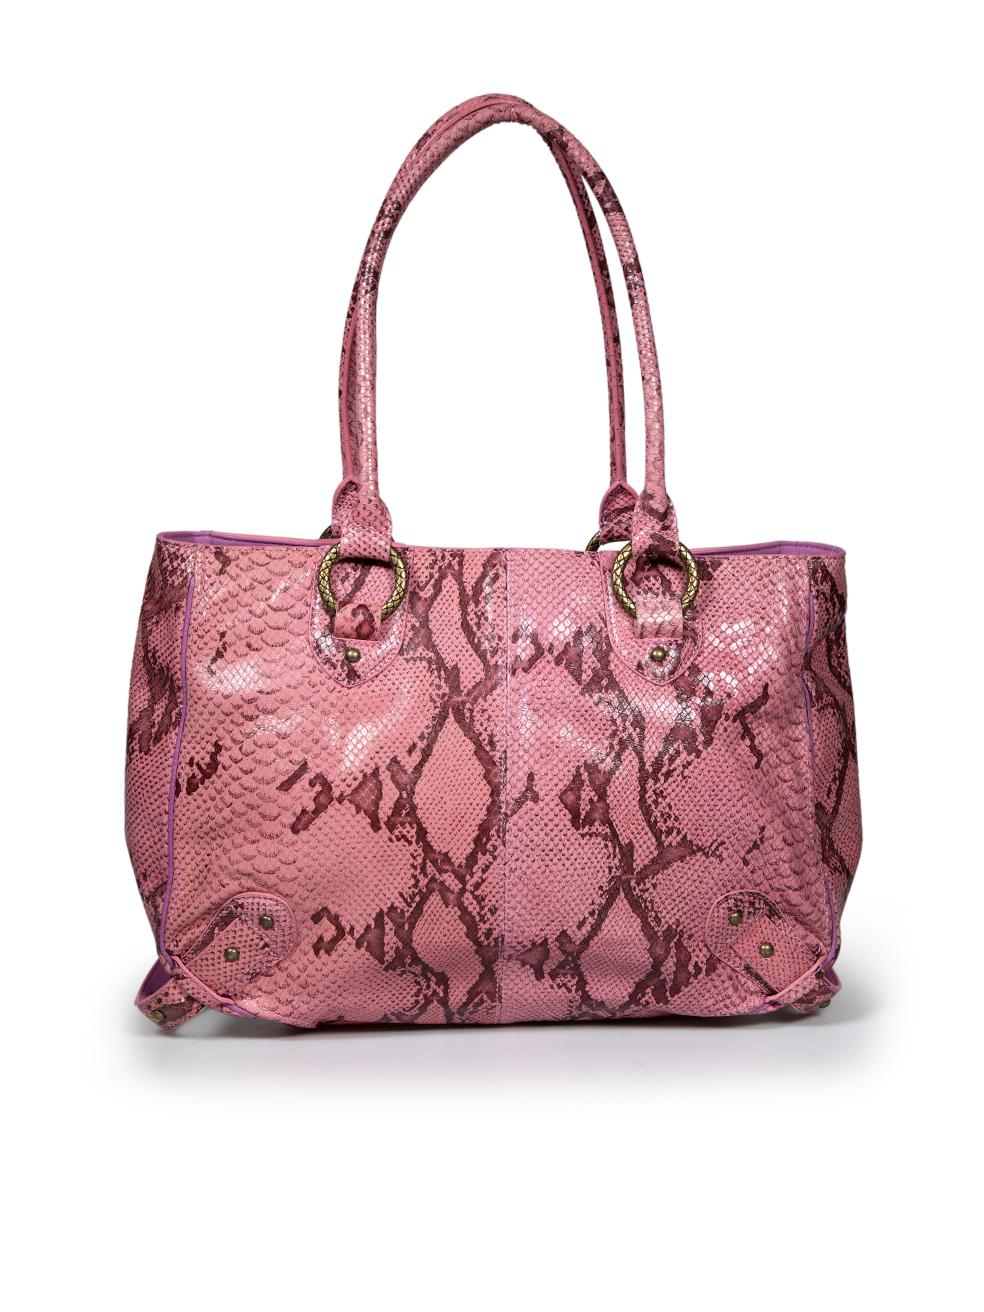 Roberto Cavalli Just Cavalli Pink Snake Embossed Leather Shoulder Bag In Good Condition In London, GB